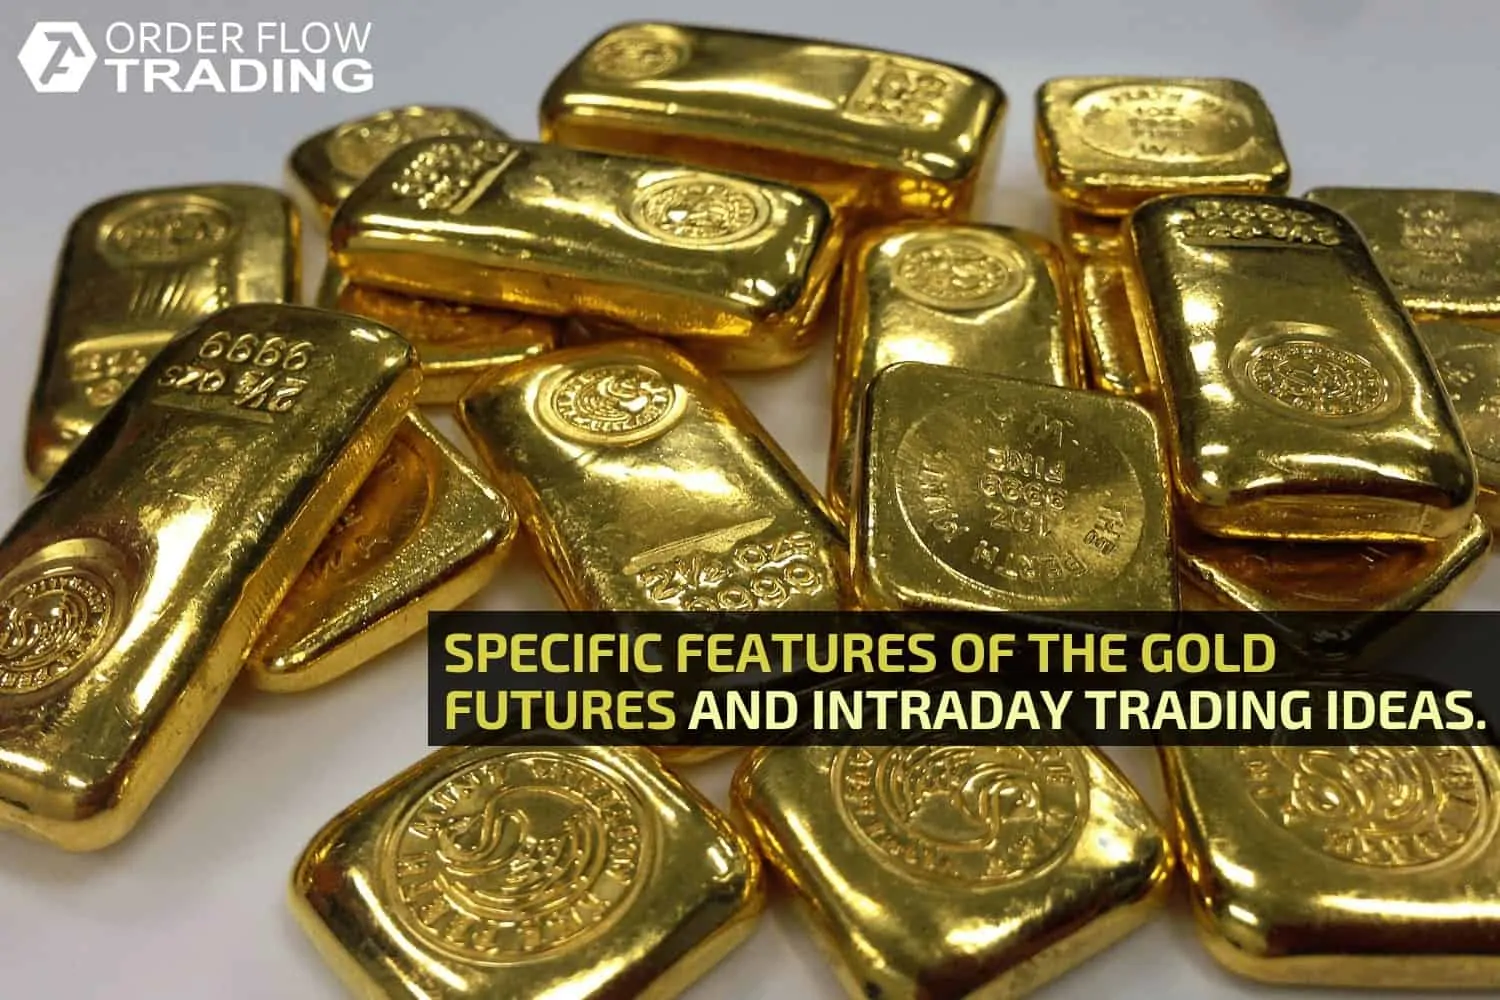 Specific features of the gold futures and intraday trading ideas.